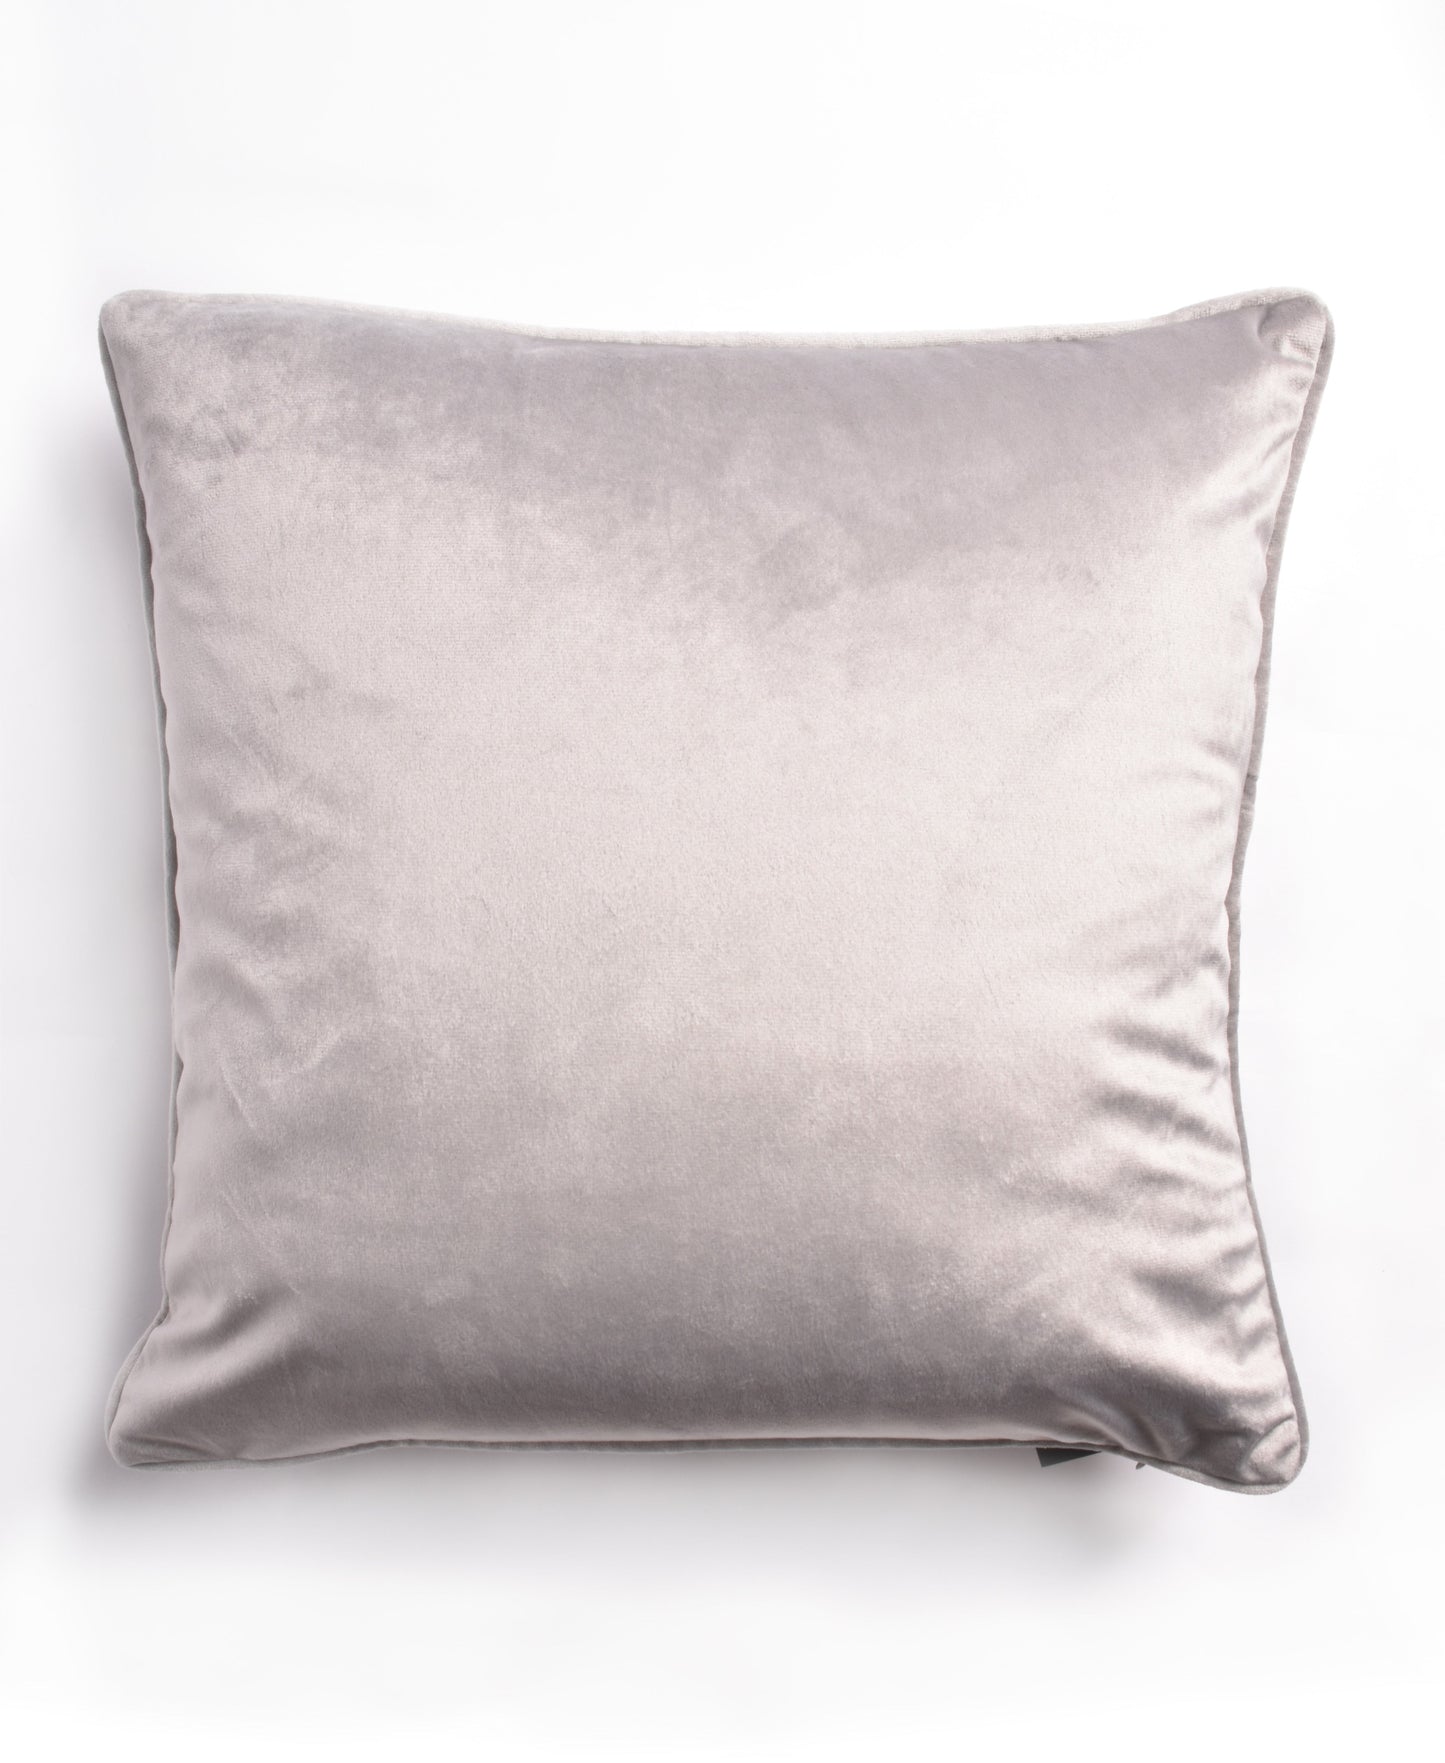 French Velvet Piped Cushion Cover - Silver